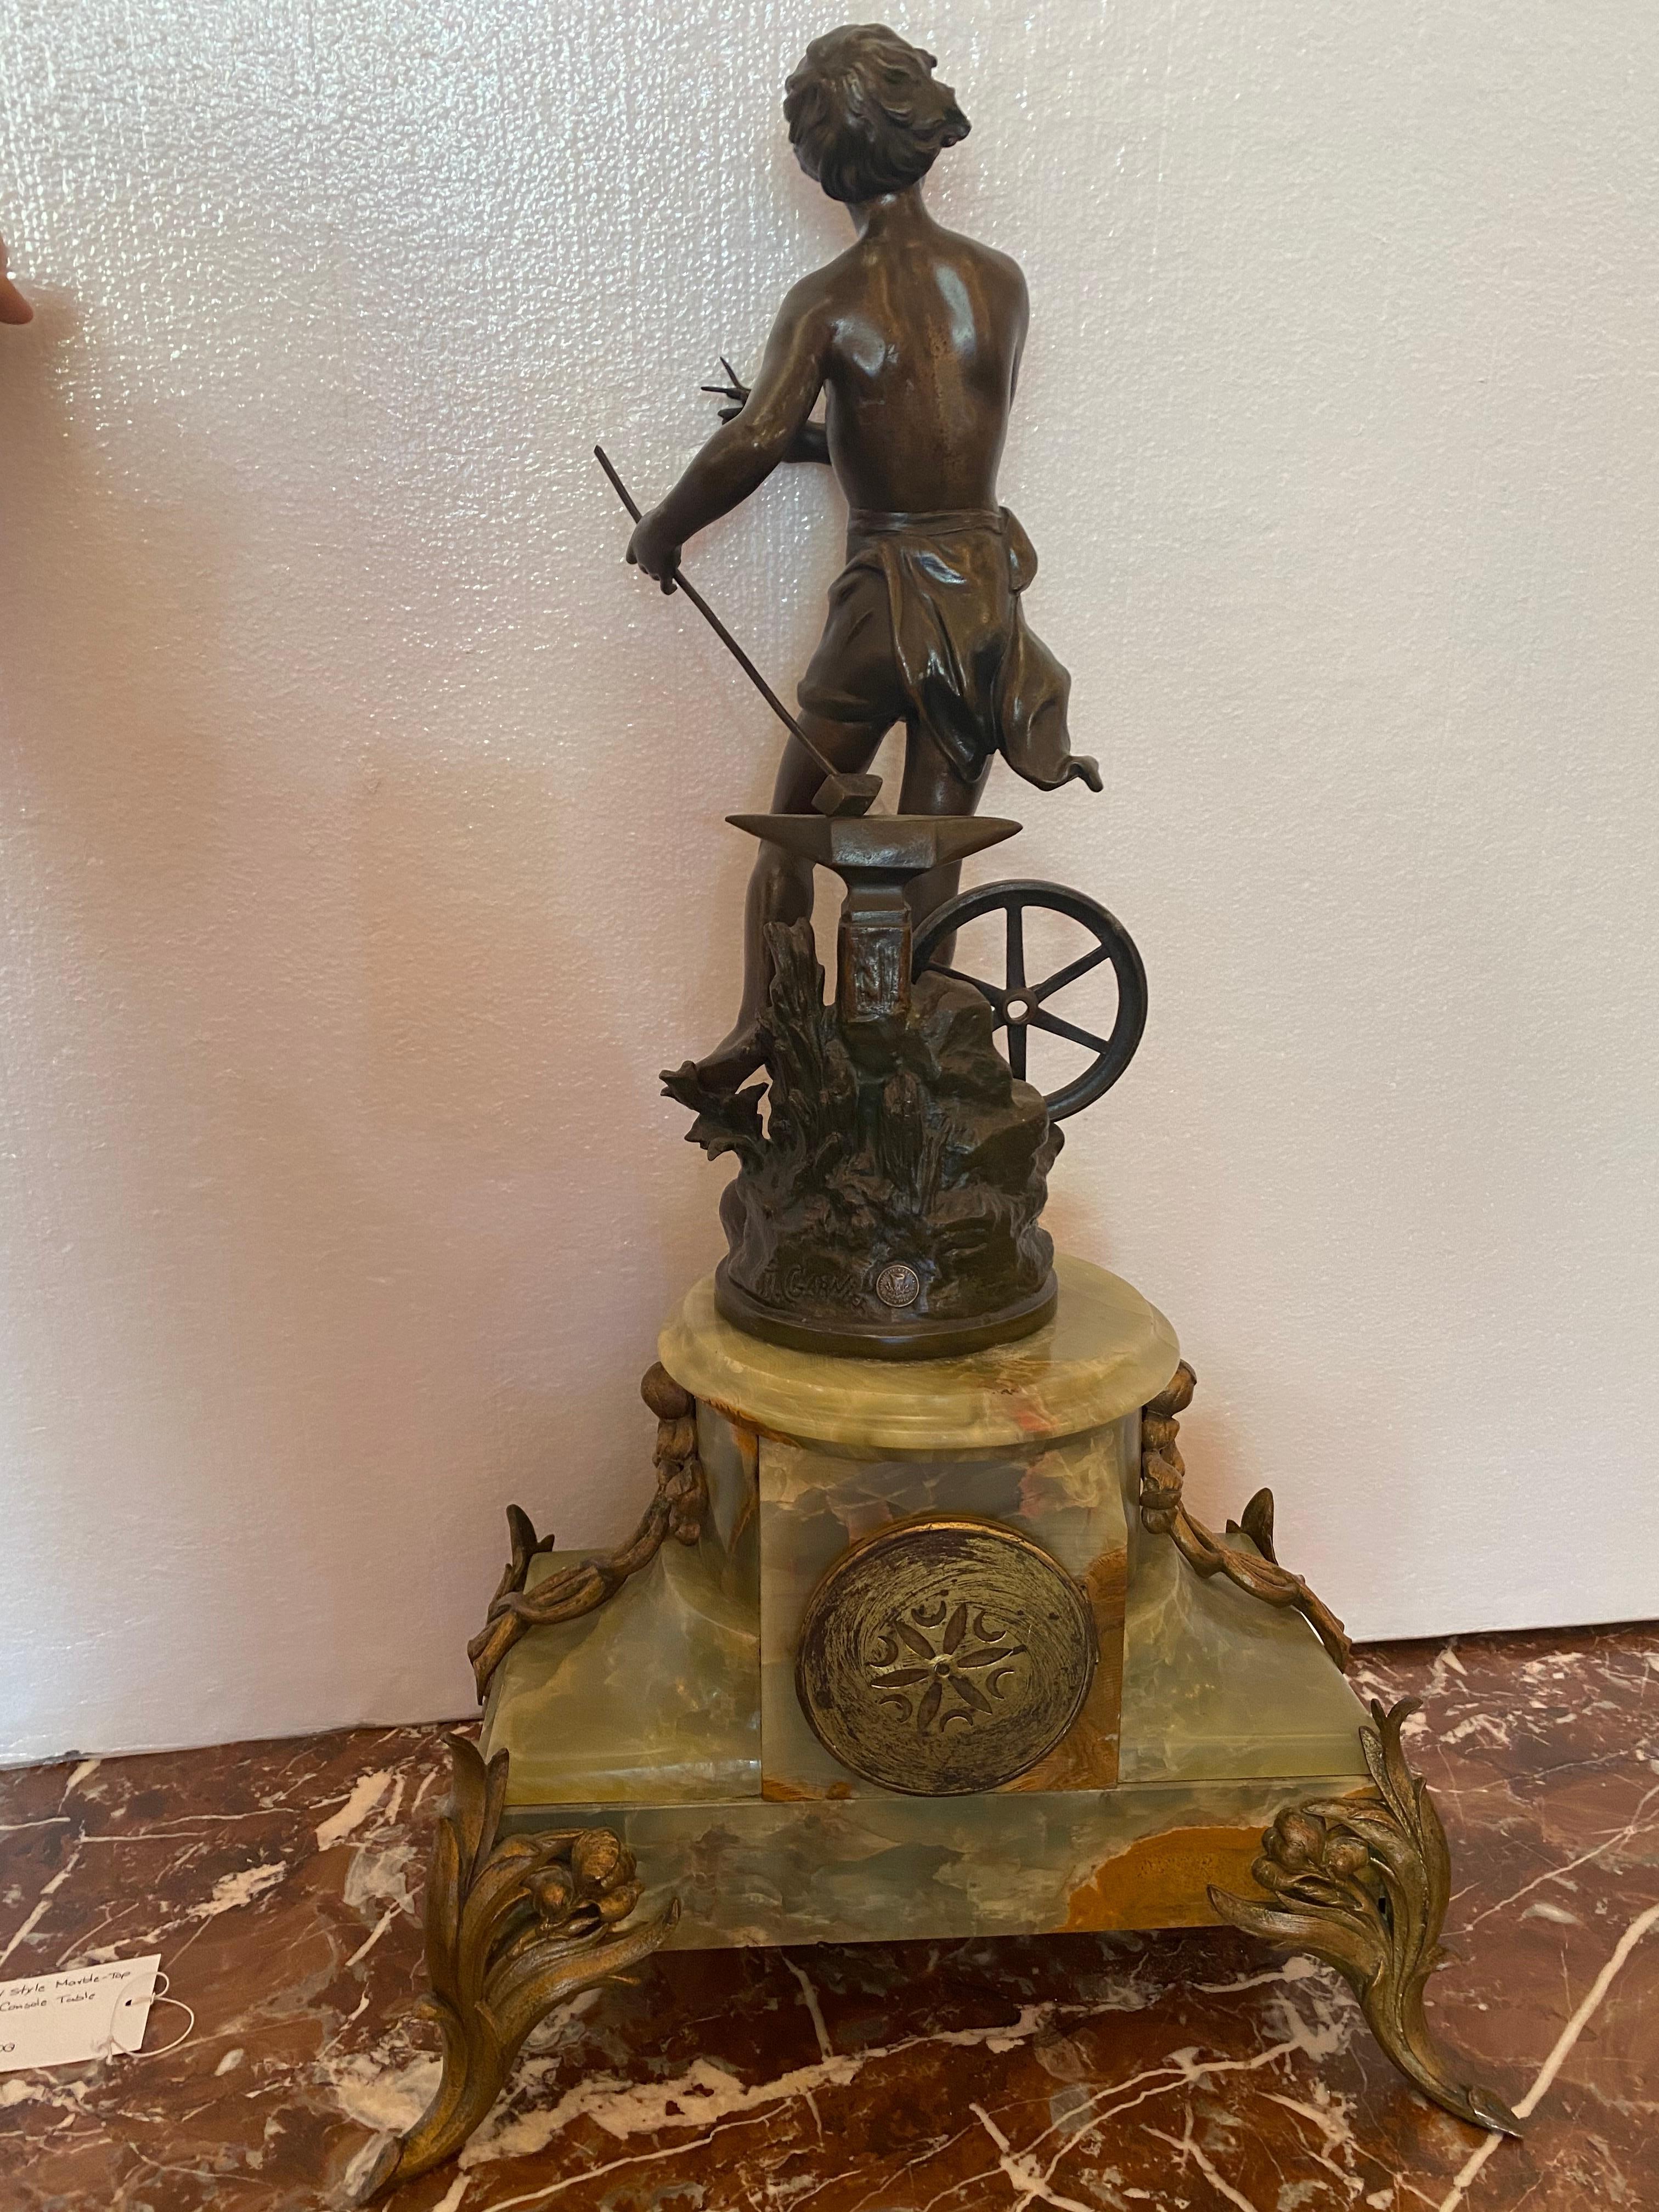 19th Century Travail Par Kossowsk Mantel Clock In Excellent Condition For Sale In Dallas, TX